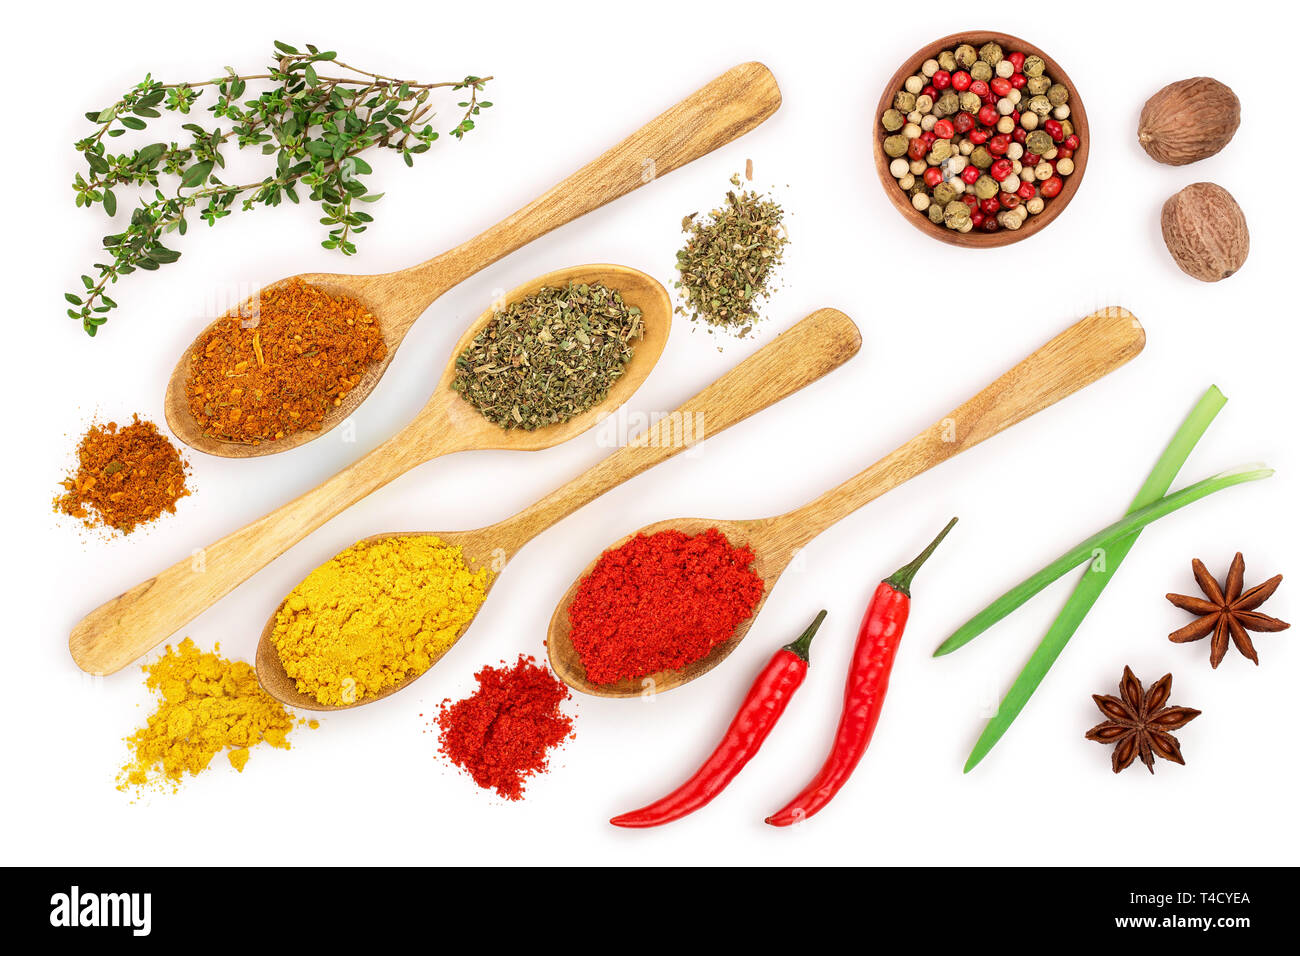 https://c8.alamy.com/comp/T4CYEA/mix-of-spices-in-wooden-spoon-isolated-on-a-white-background-top-view-flat-lay-set-or-collection-T4CYEA.jpg